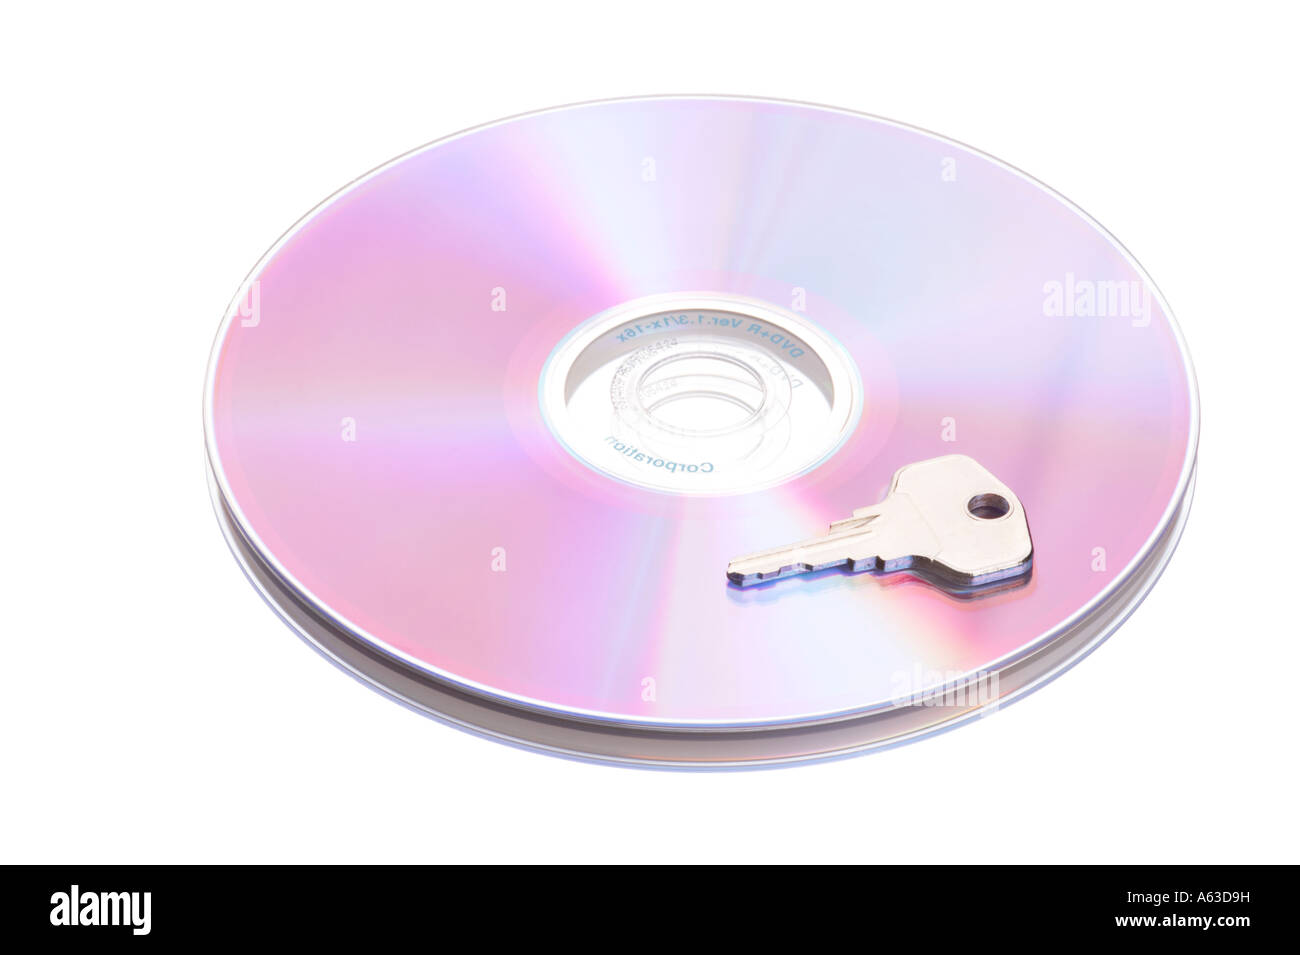 Concept data security, single DVD with key isolated on white baclground Stock Photo